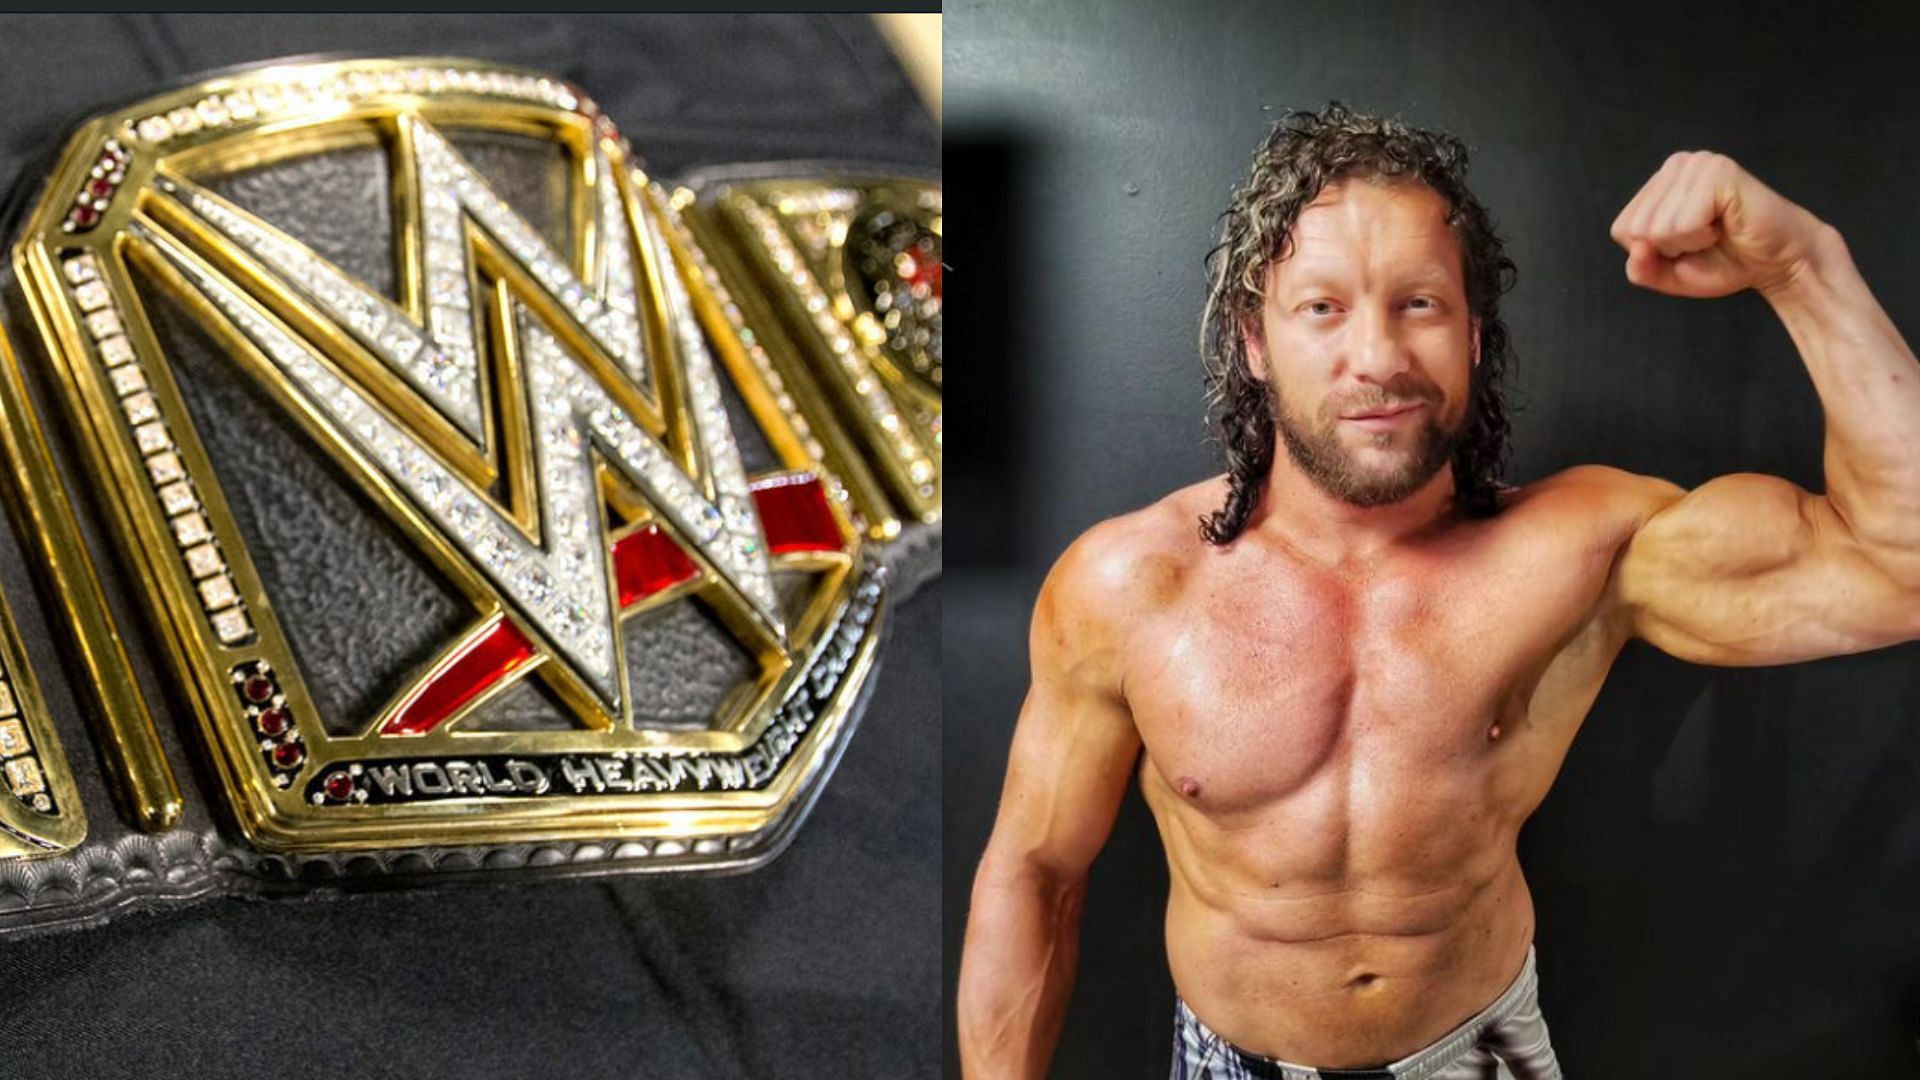 Kenny Omega is a former AEW World Champion [Image Credits: WWE